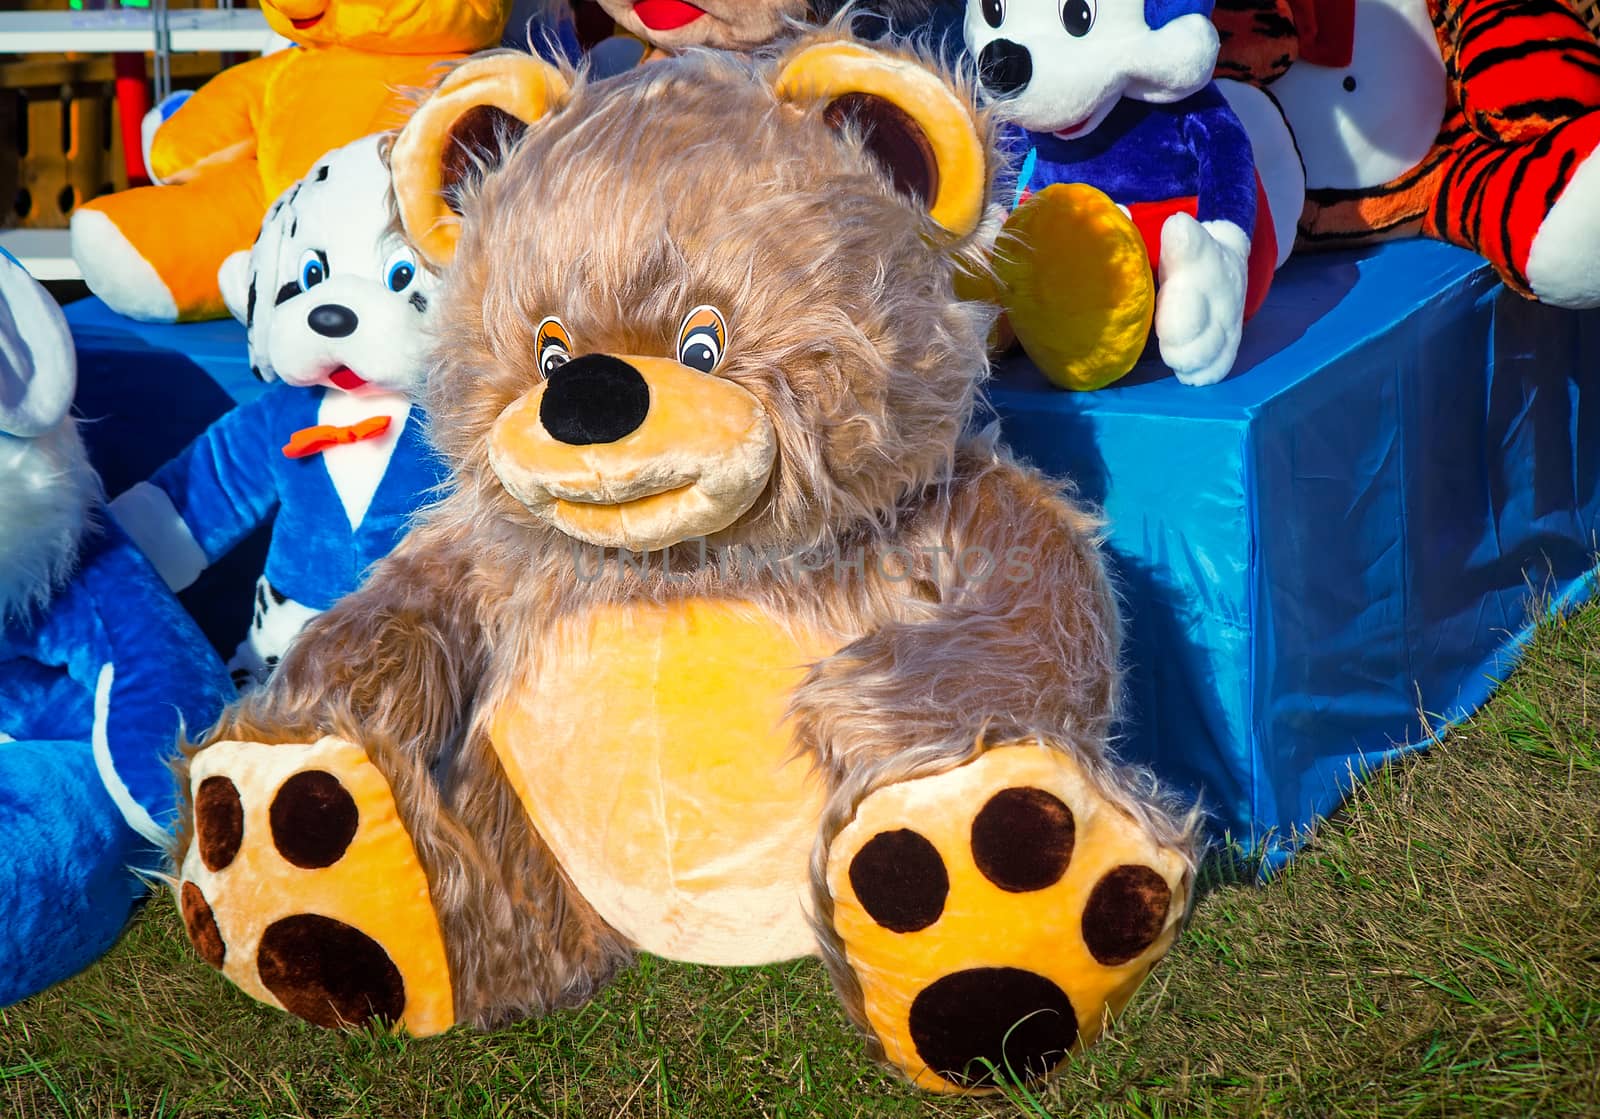 For sale at fair toys for children are presented: big amusing teddy bear and other toy animals.